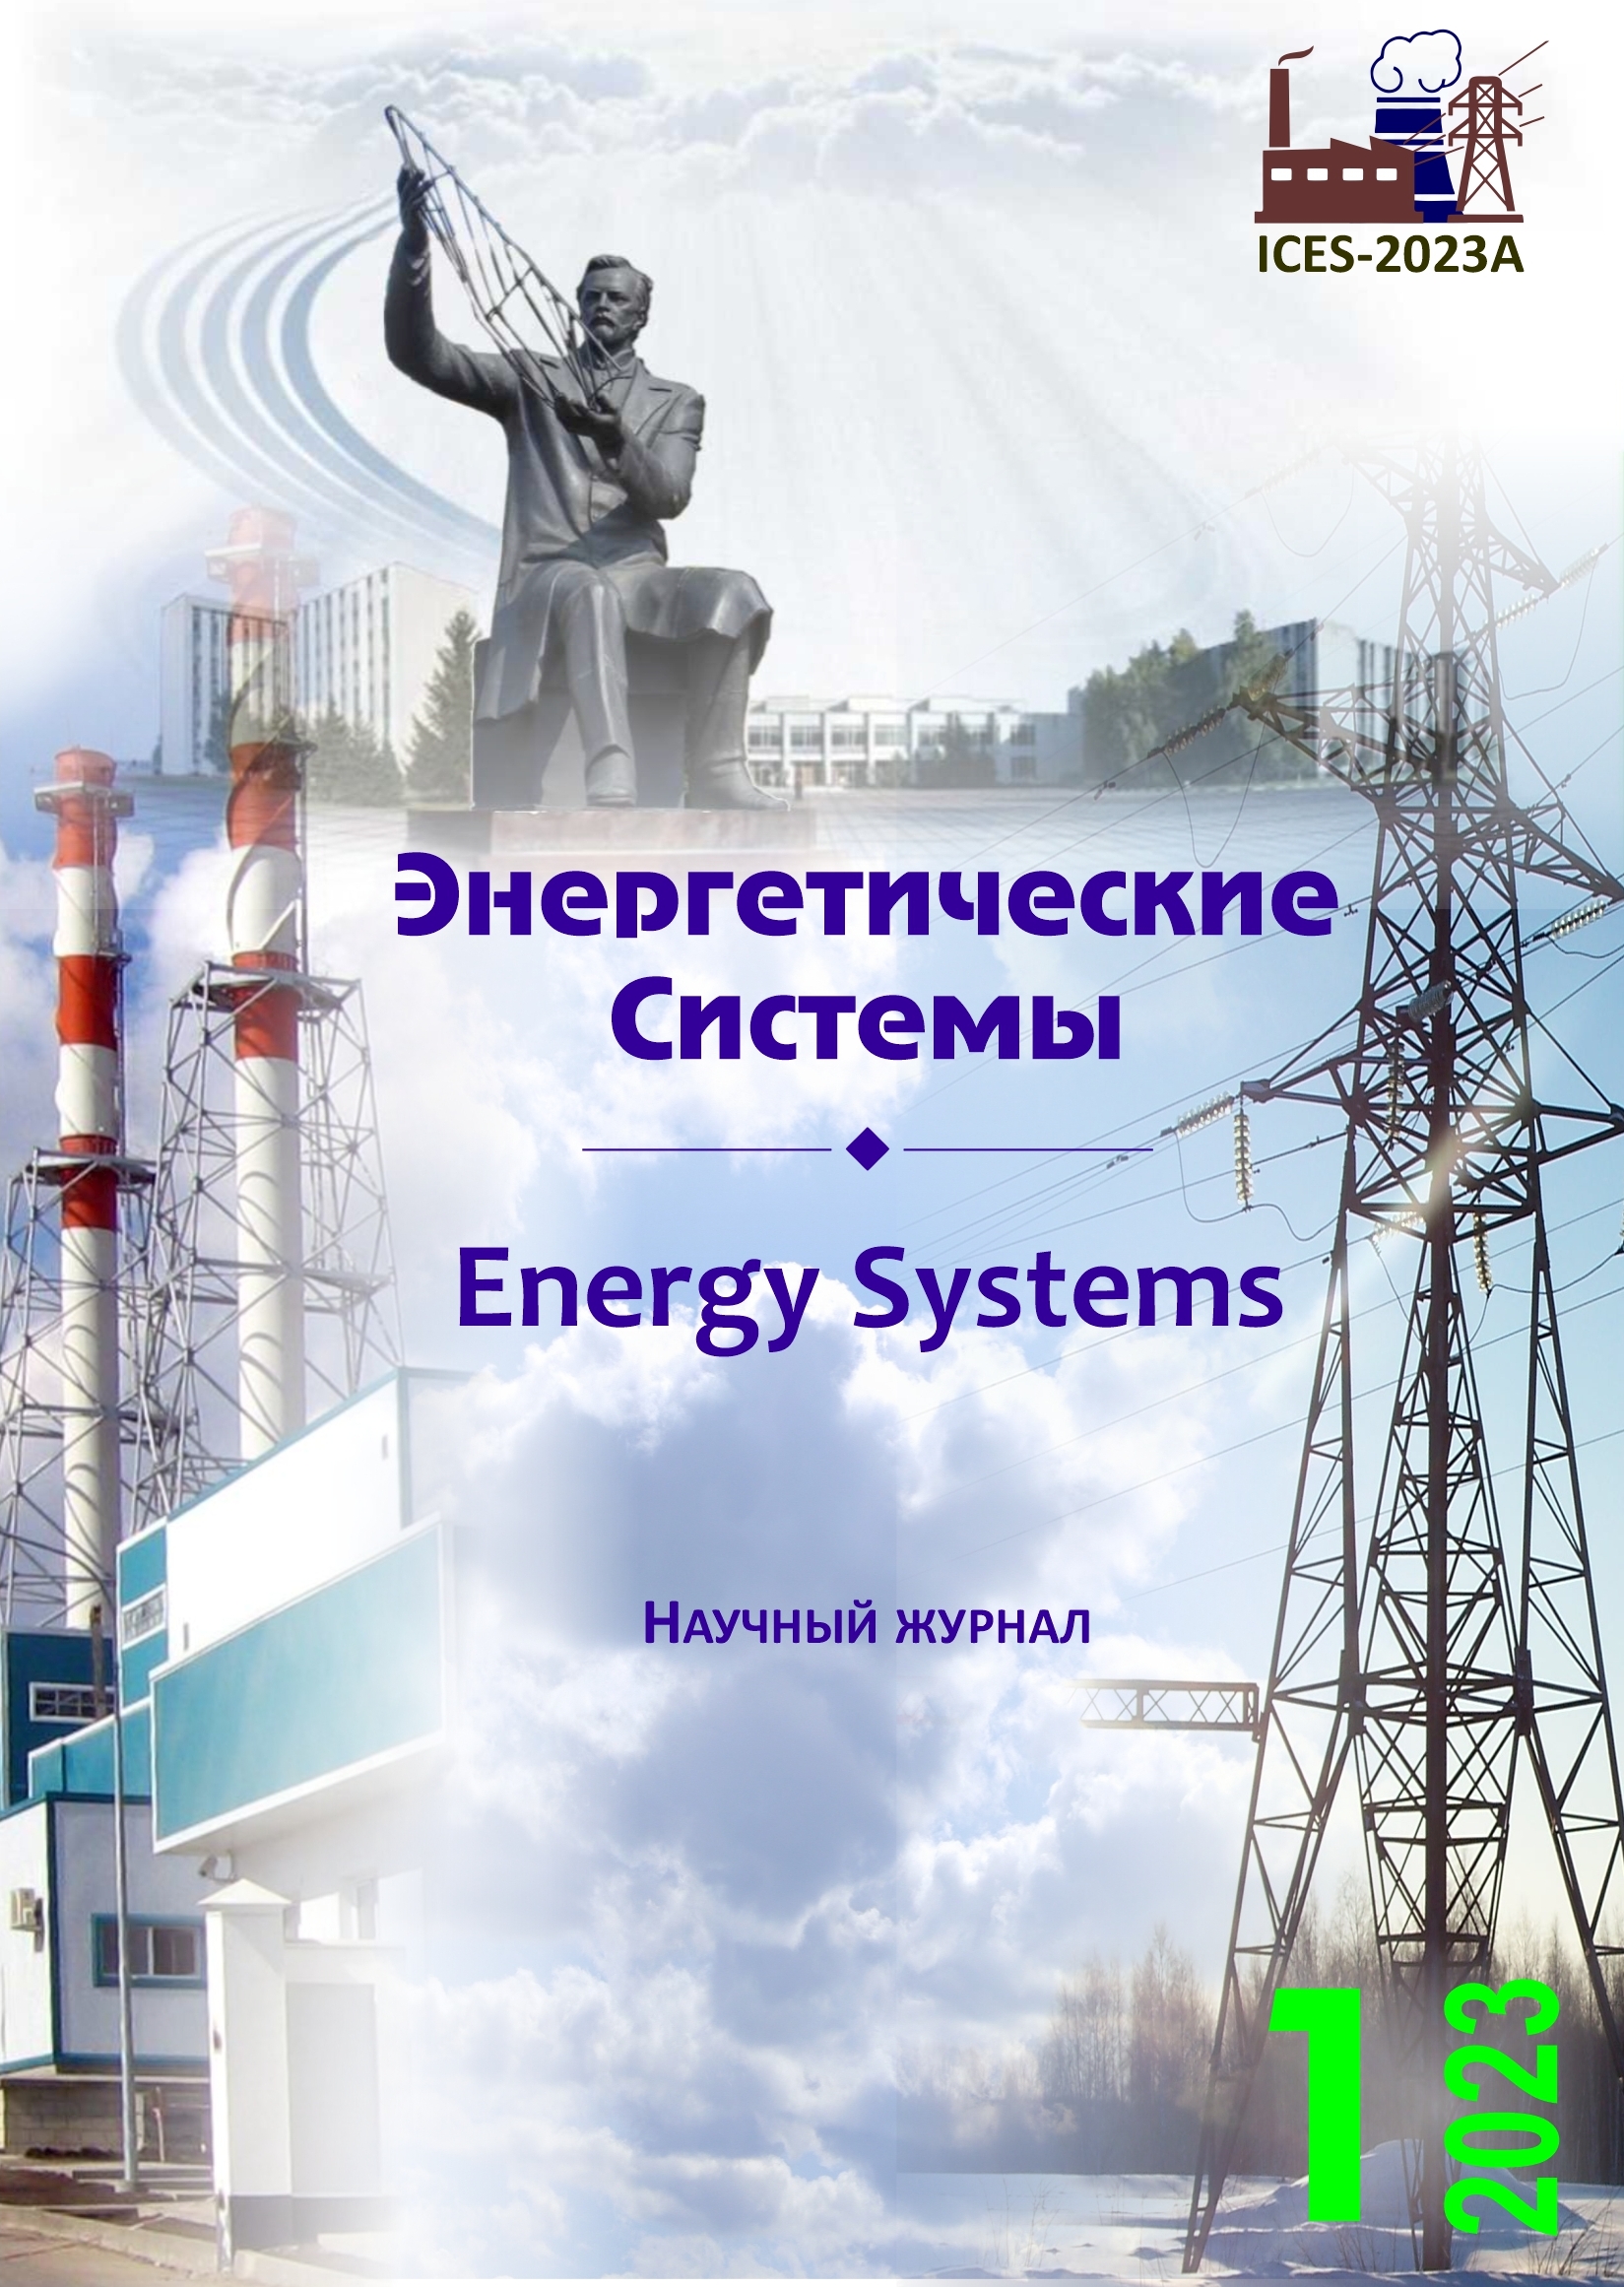 					View Vol. 8 No. 1 (2023):  VII International Scientific and Technical Conference "Energy Systems" (ICES-2023)
				